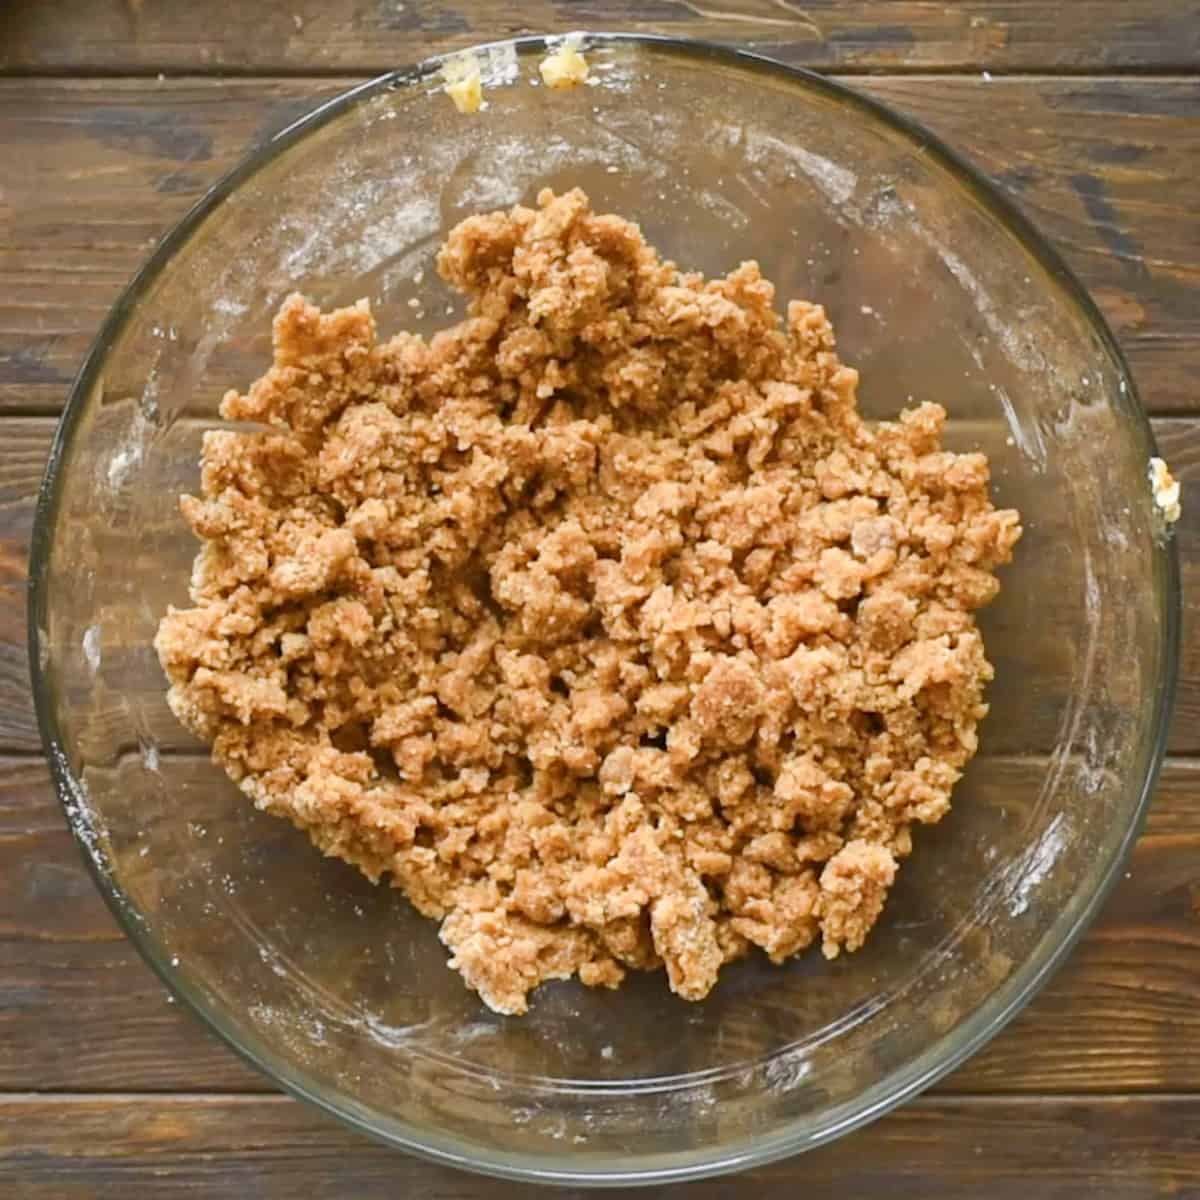 Crumb topping mixture for apple brown betty recipe in glass bowl.